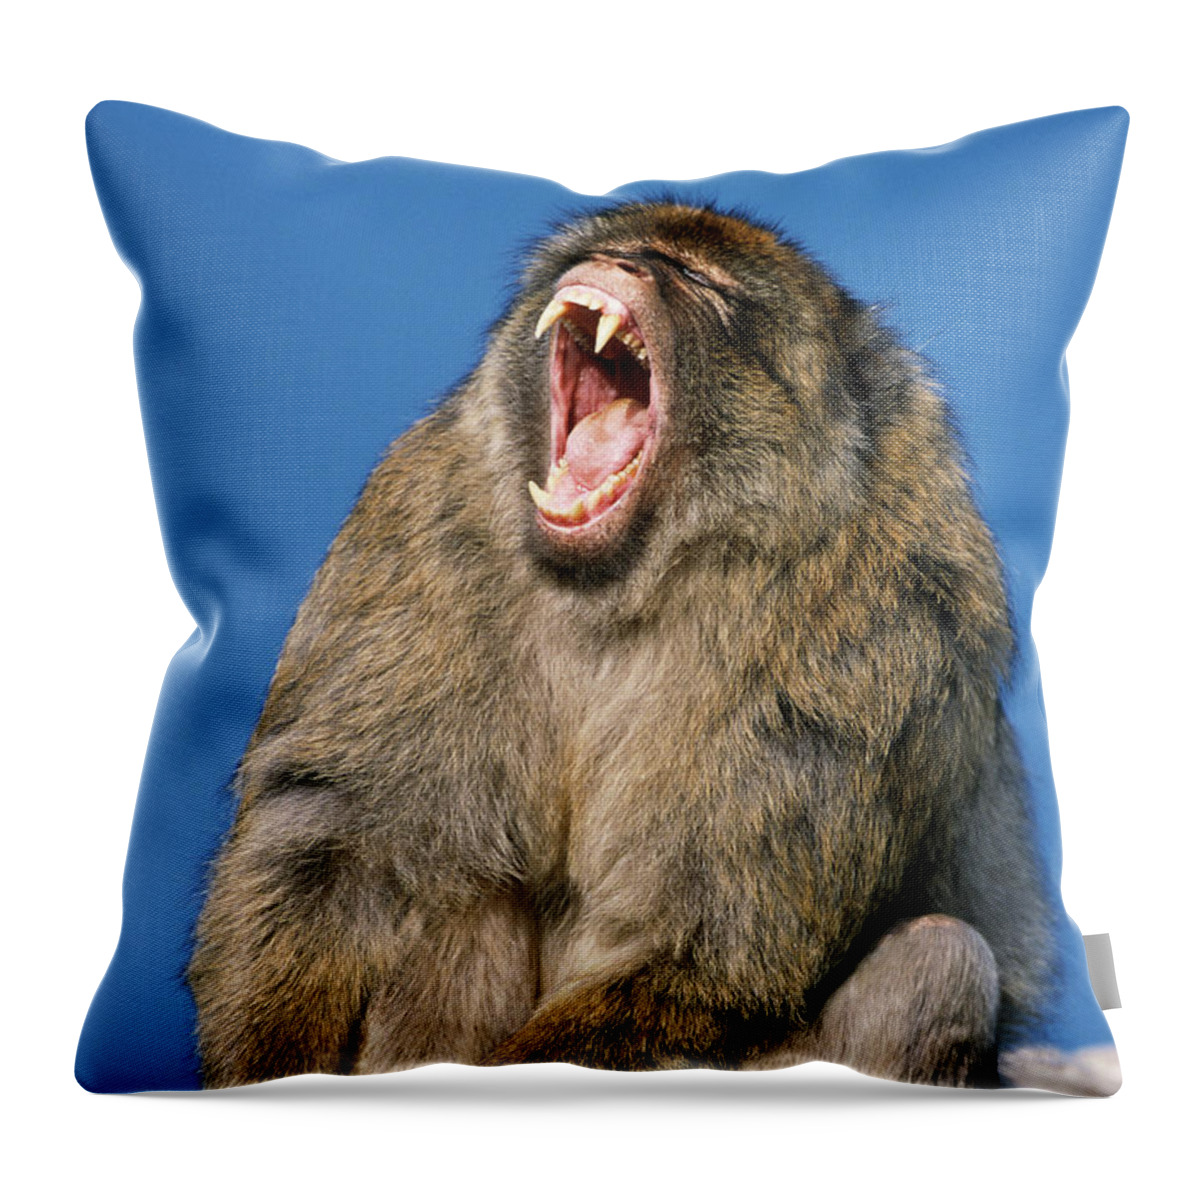 00281370 Throw Pillow featuring the photograph Barbary Macaque Yawning by Martin Woike